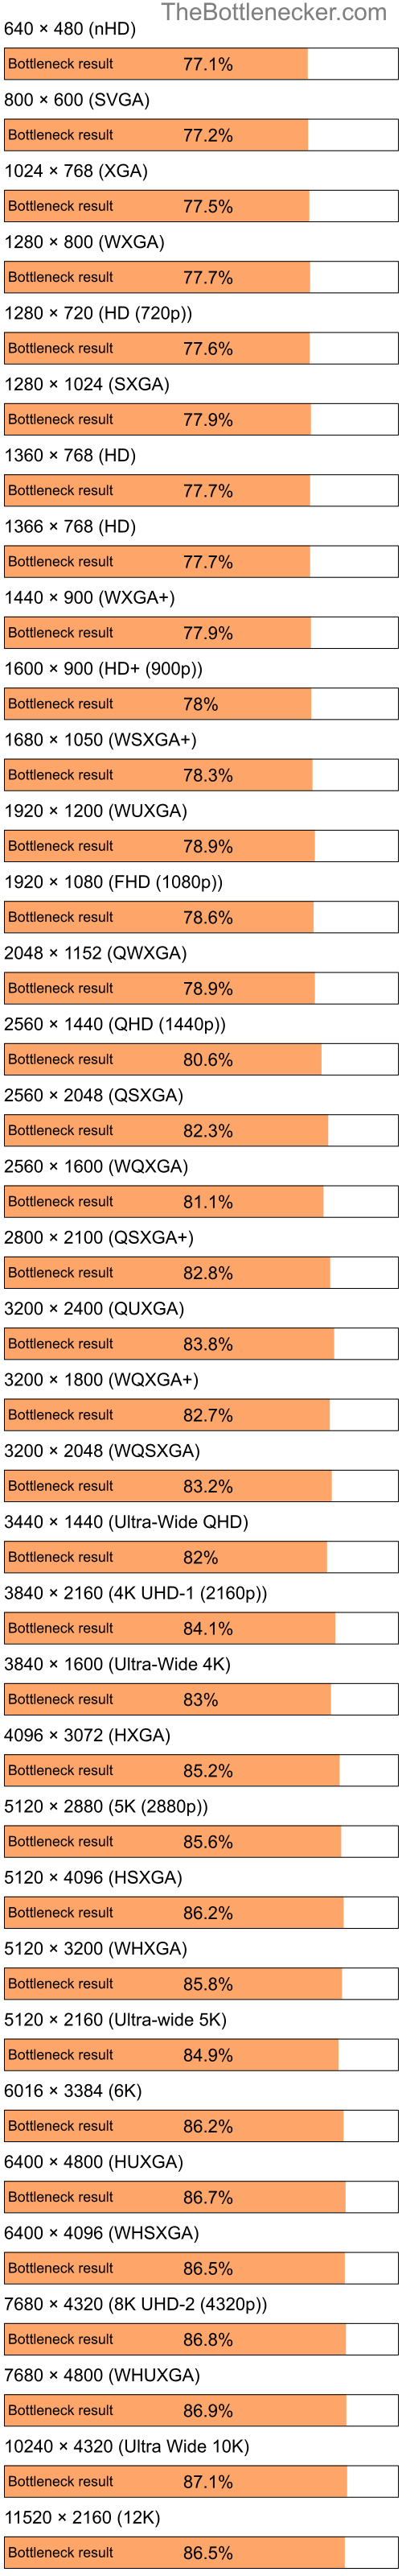 Bottleneck results by resolution for Intel Pentium 4 and NVIDIA GeForce 7200 GS in General Tasks